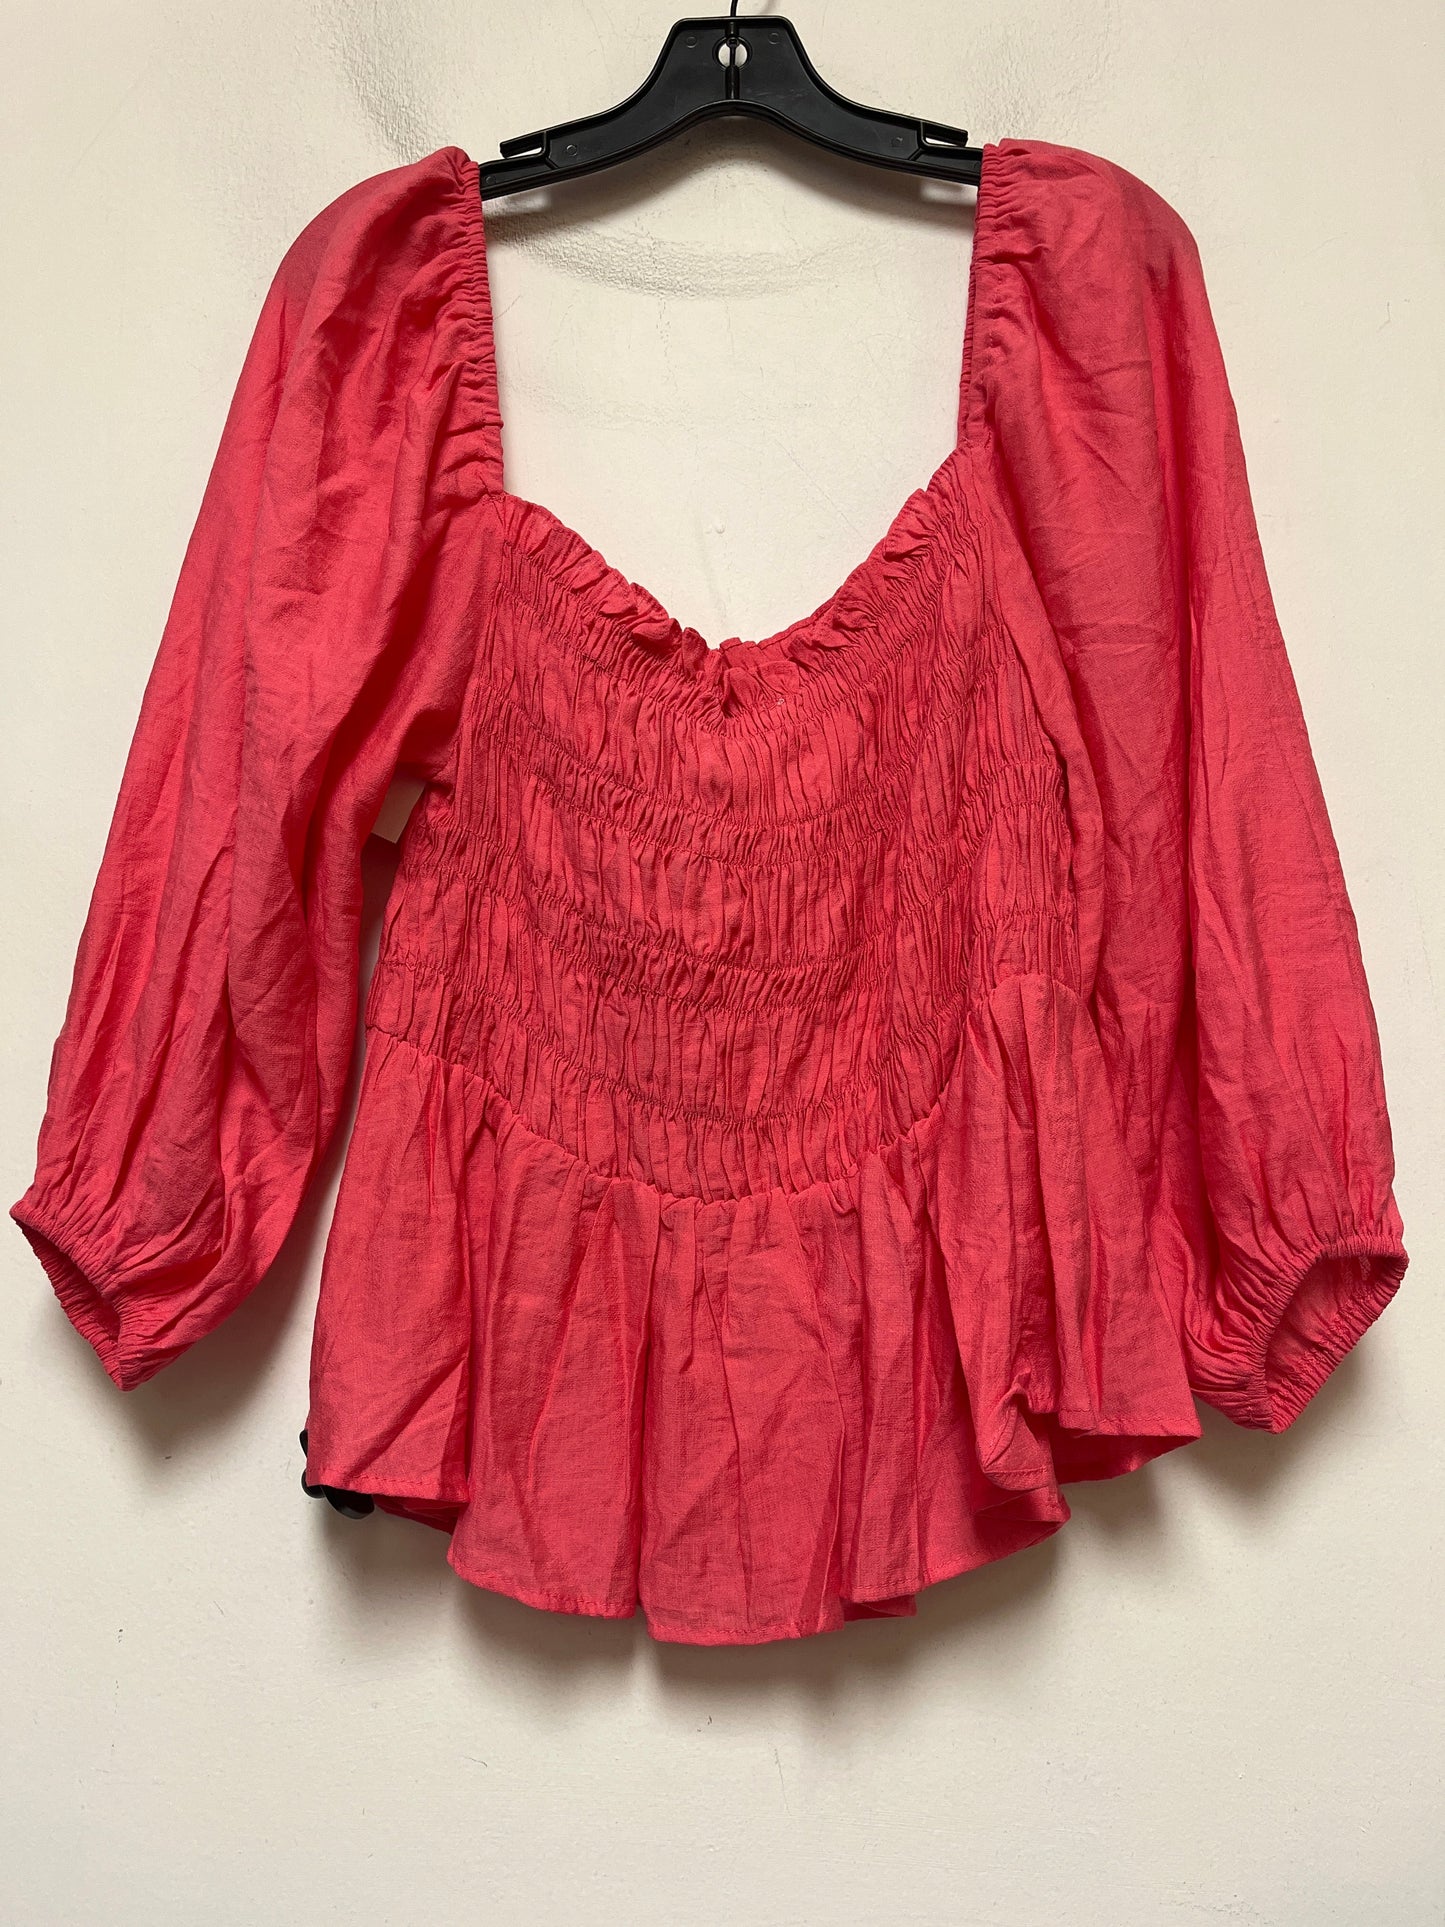 Coral Top Short Sleeve Flying Tomato, Size L